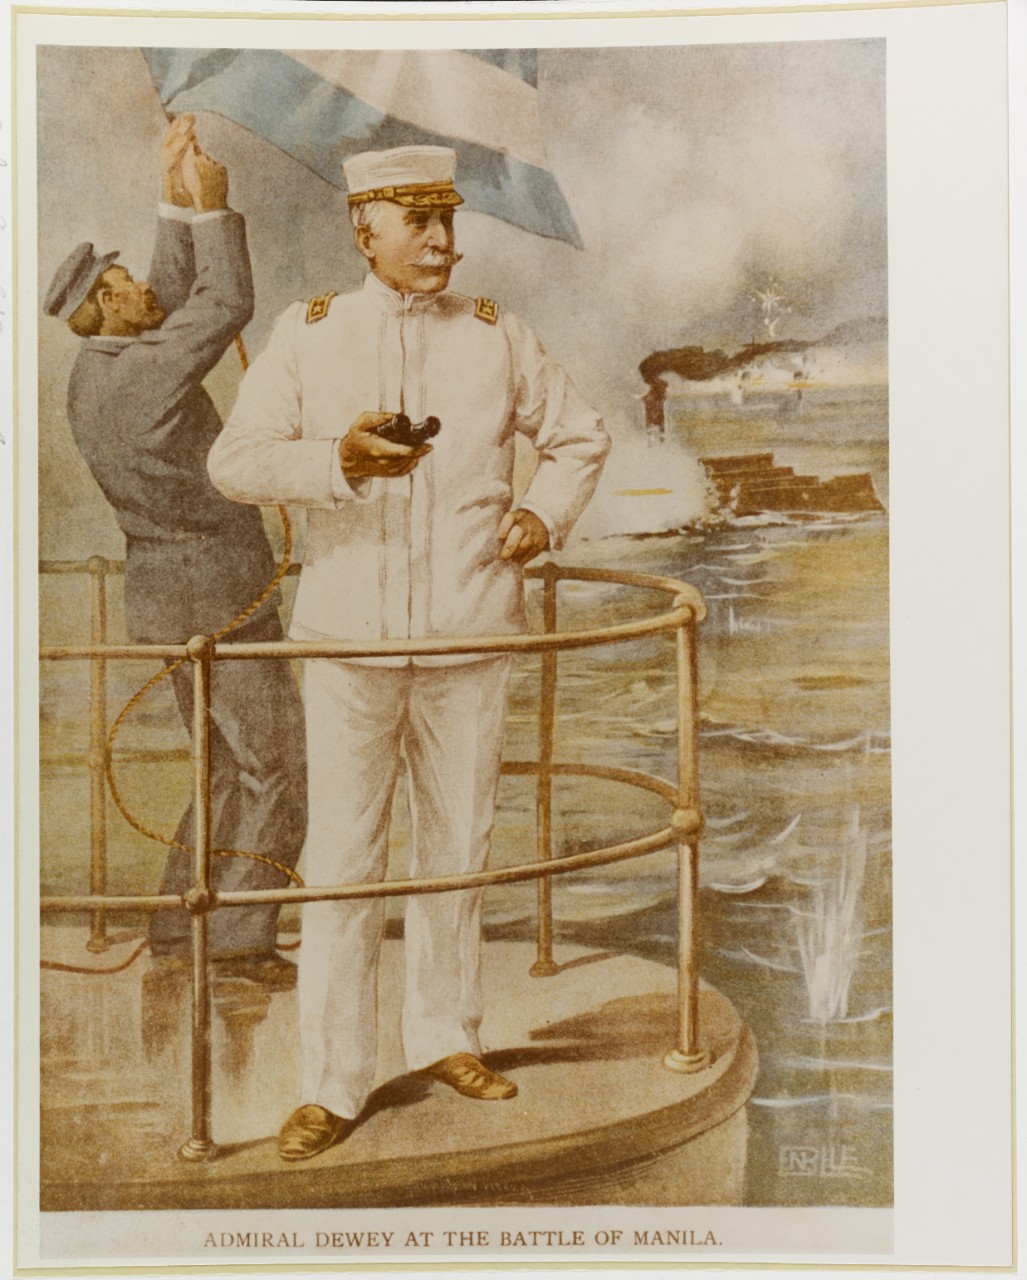 "Dewey at the Battle of Manila" 1 May 1898. Depicting Dewey on the Bridge of His Flagship Olympia (C-6), in the Spanish-American War. Naval Historical Center, Photographic Branch, #NH84510